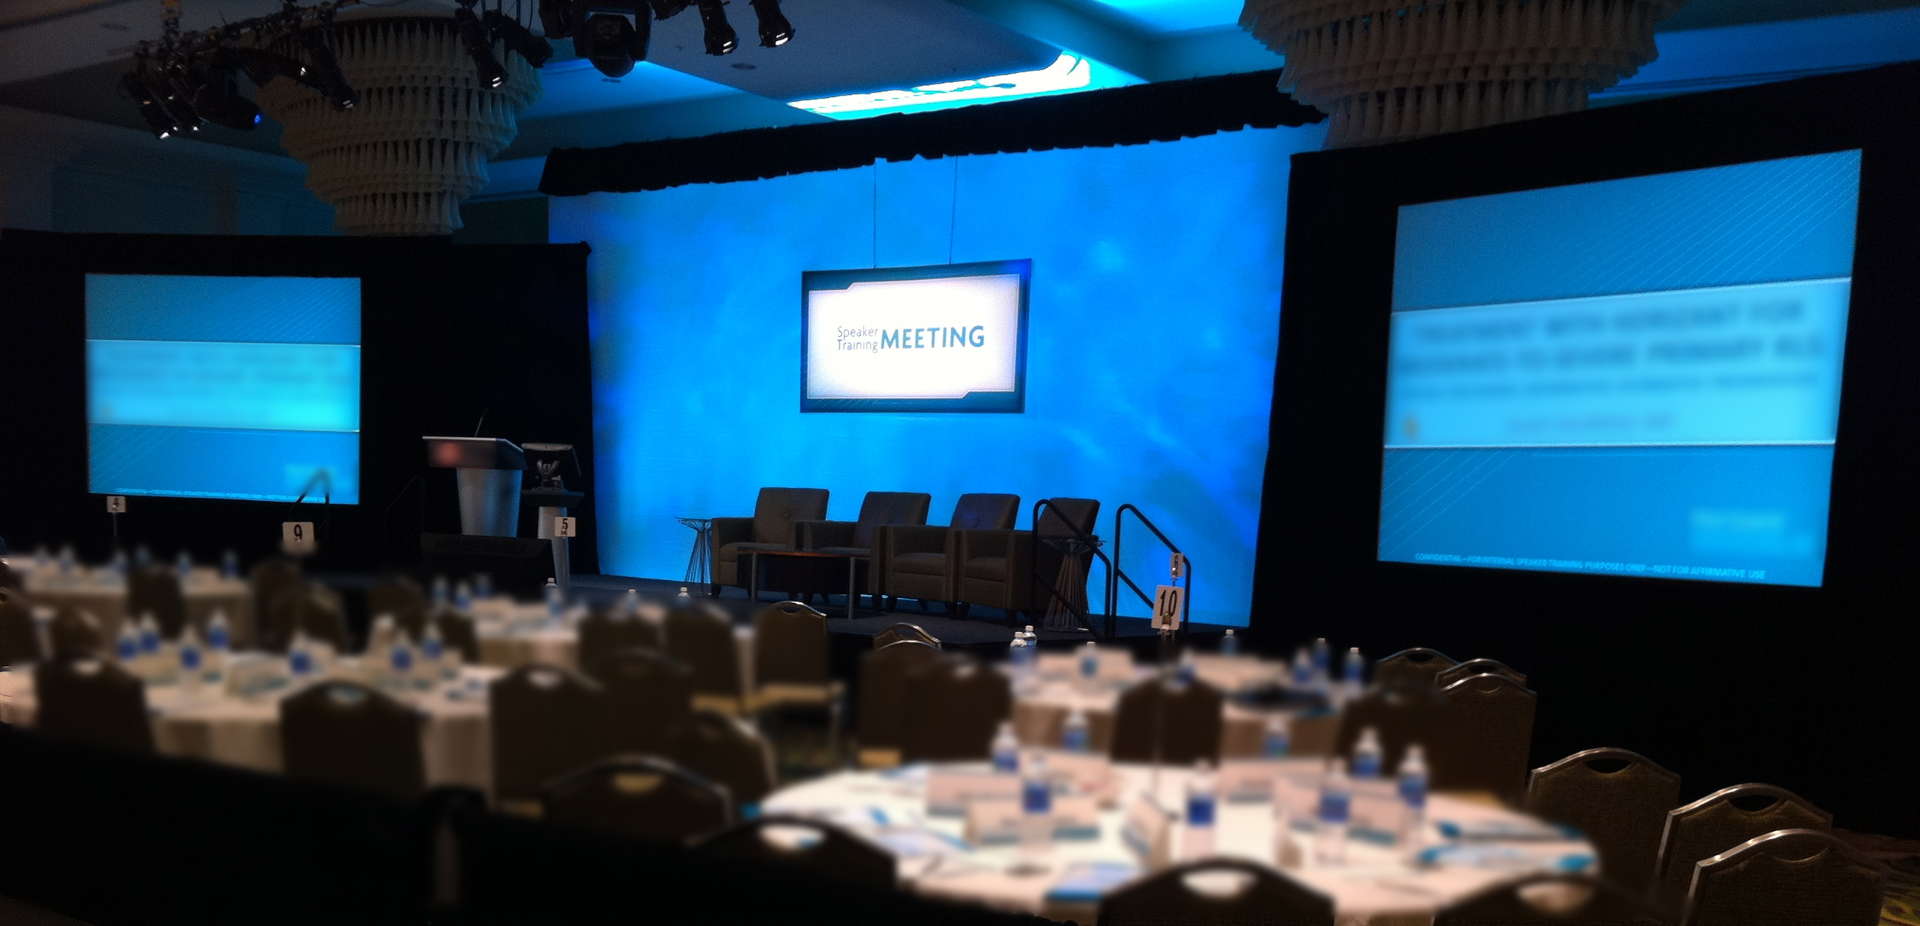  SONUS Provided AV Rental and Production Services for Corporate Client from Raleigh Durham NC and Greater Philadelphia locations